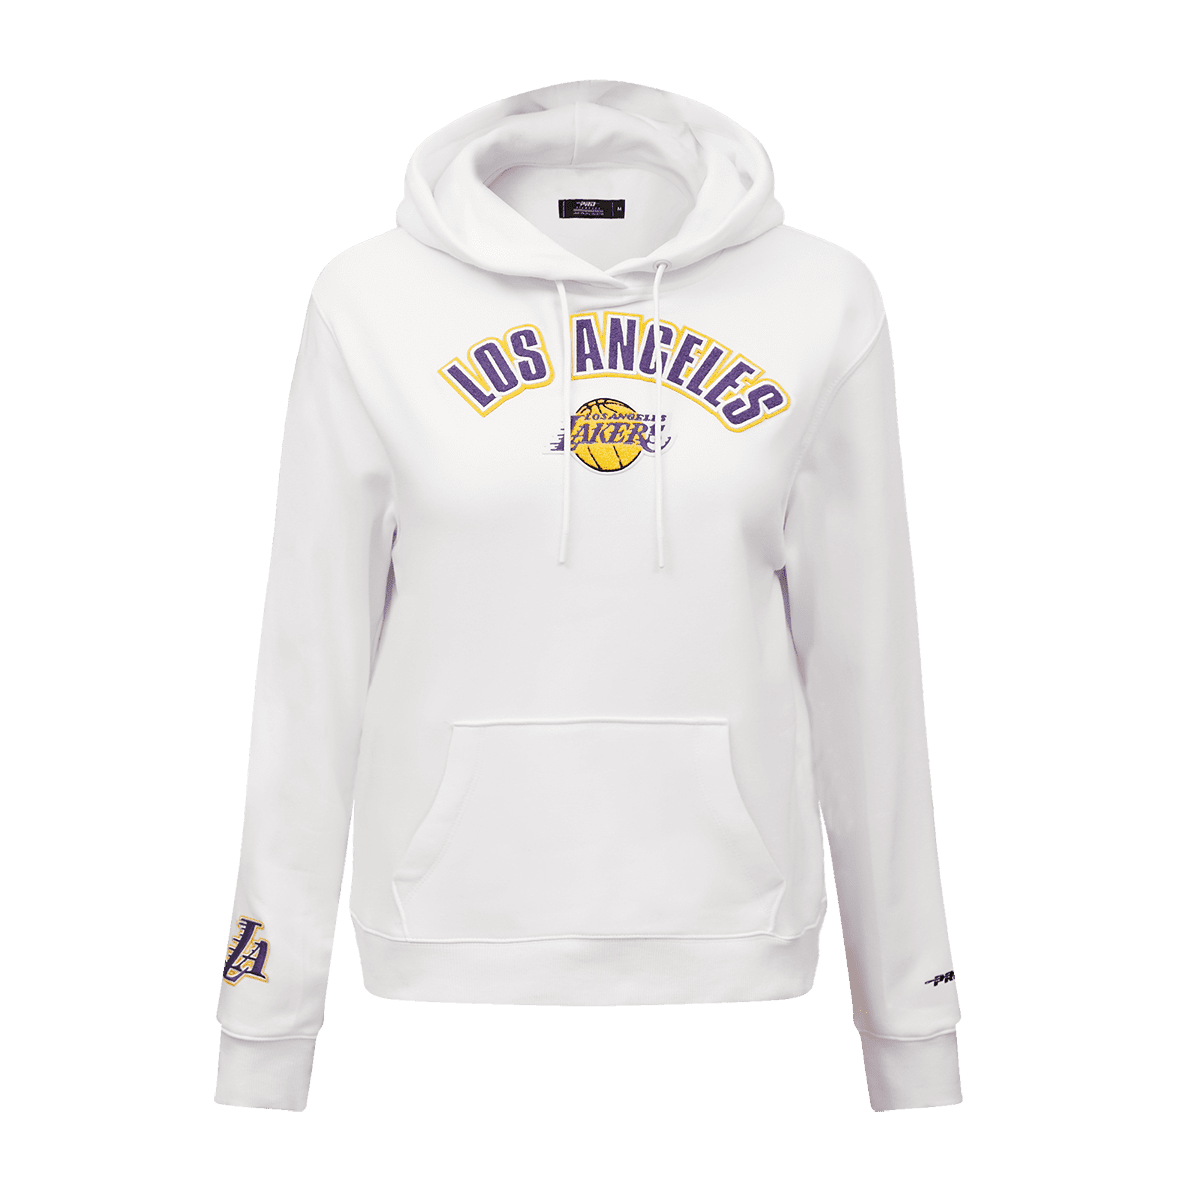 urban outfitters lakers jacket